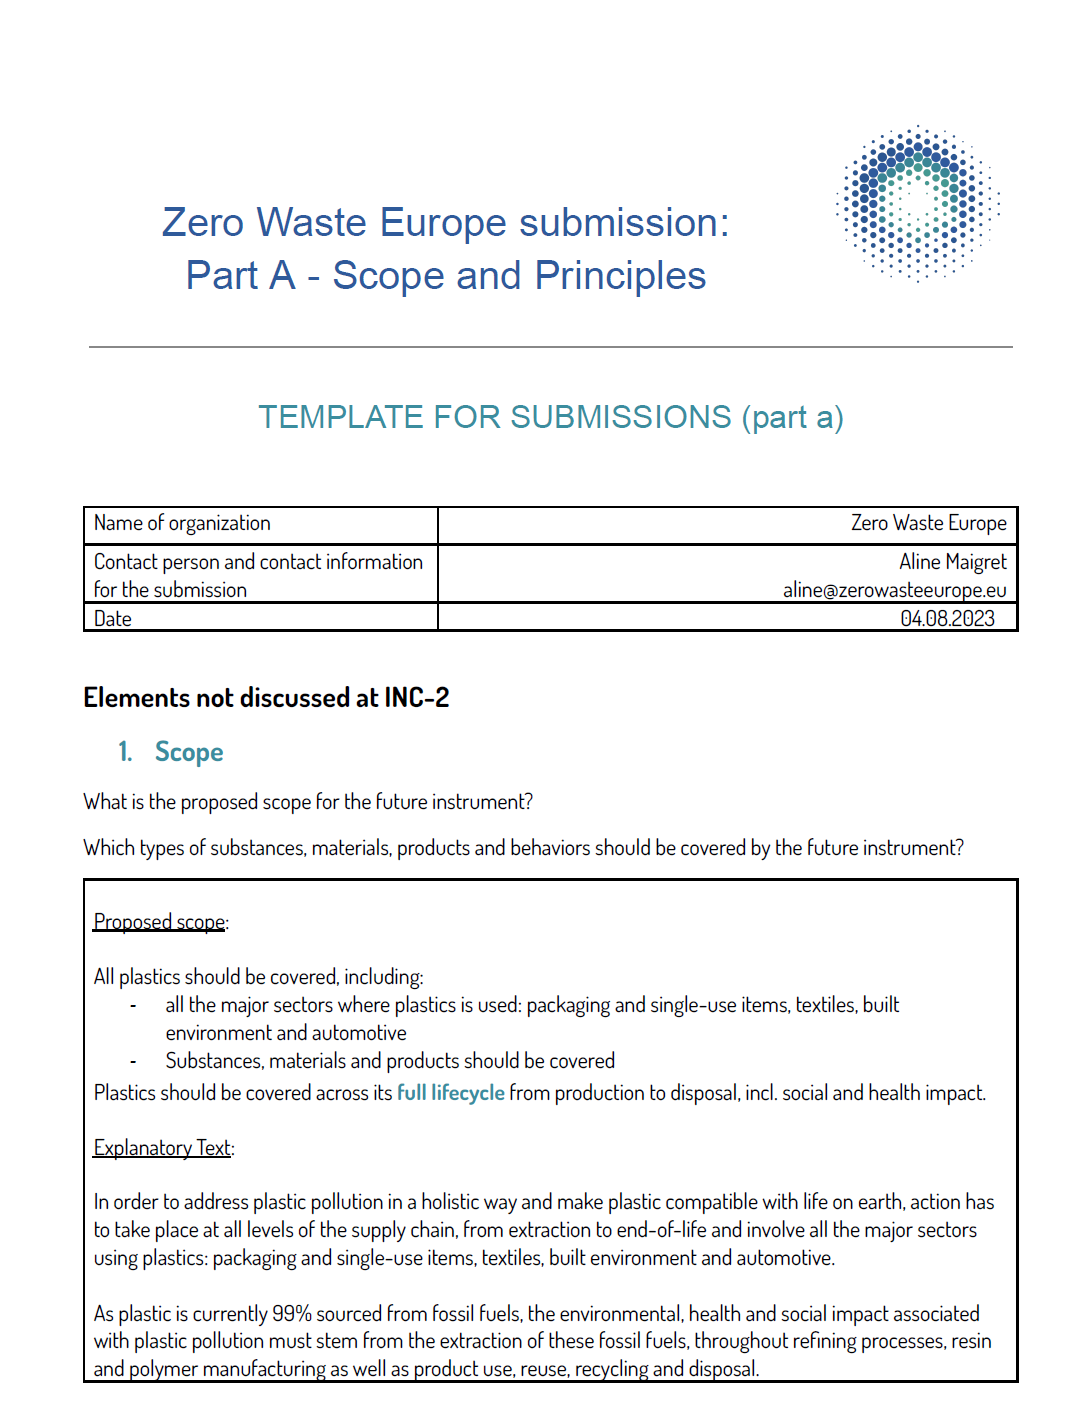 ZWE submission to the second Intergovernmental Negotiating Committee (INC-3) to develop an international legally binding instrument on plastic pollution